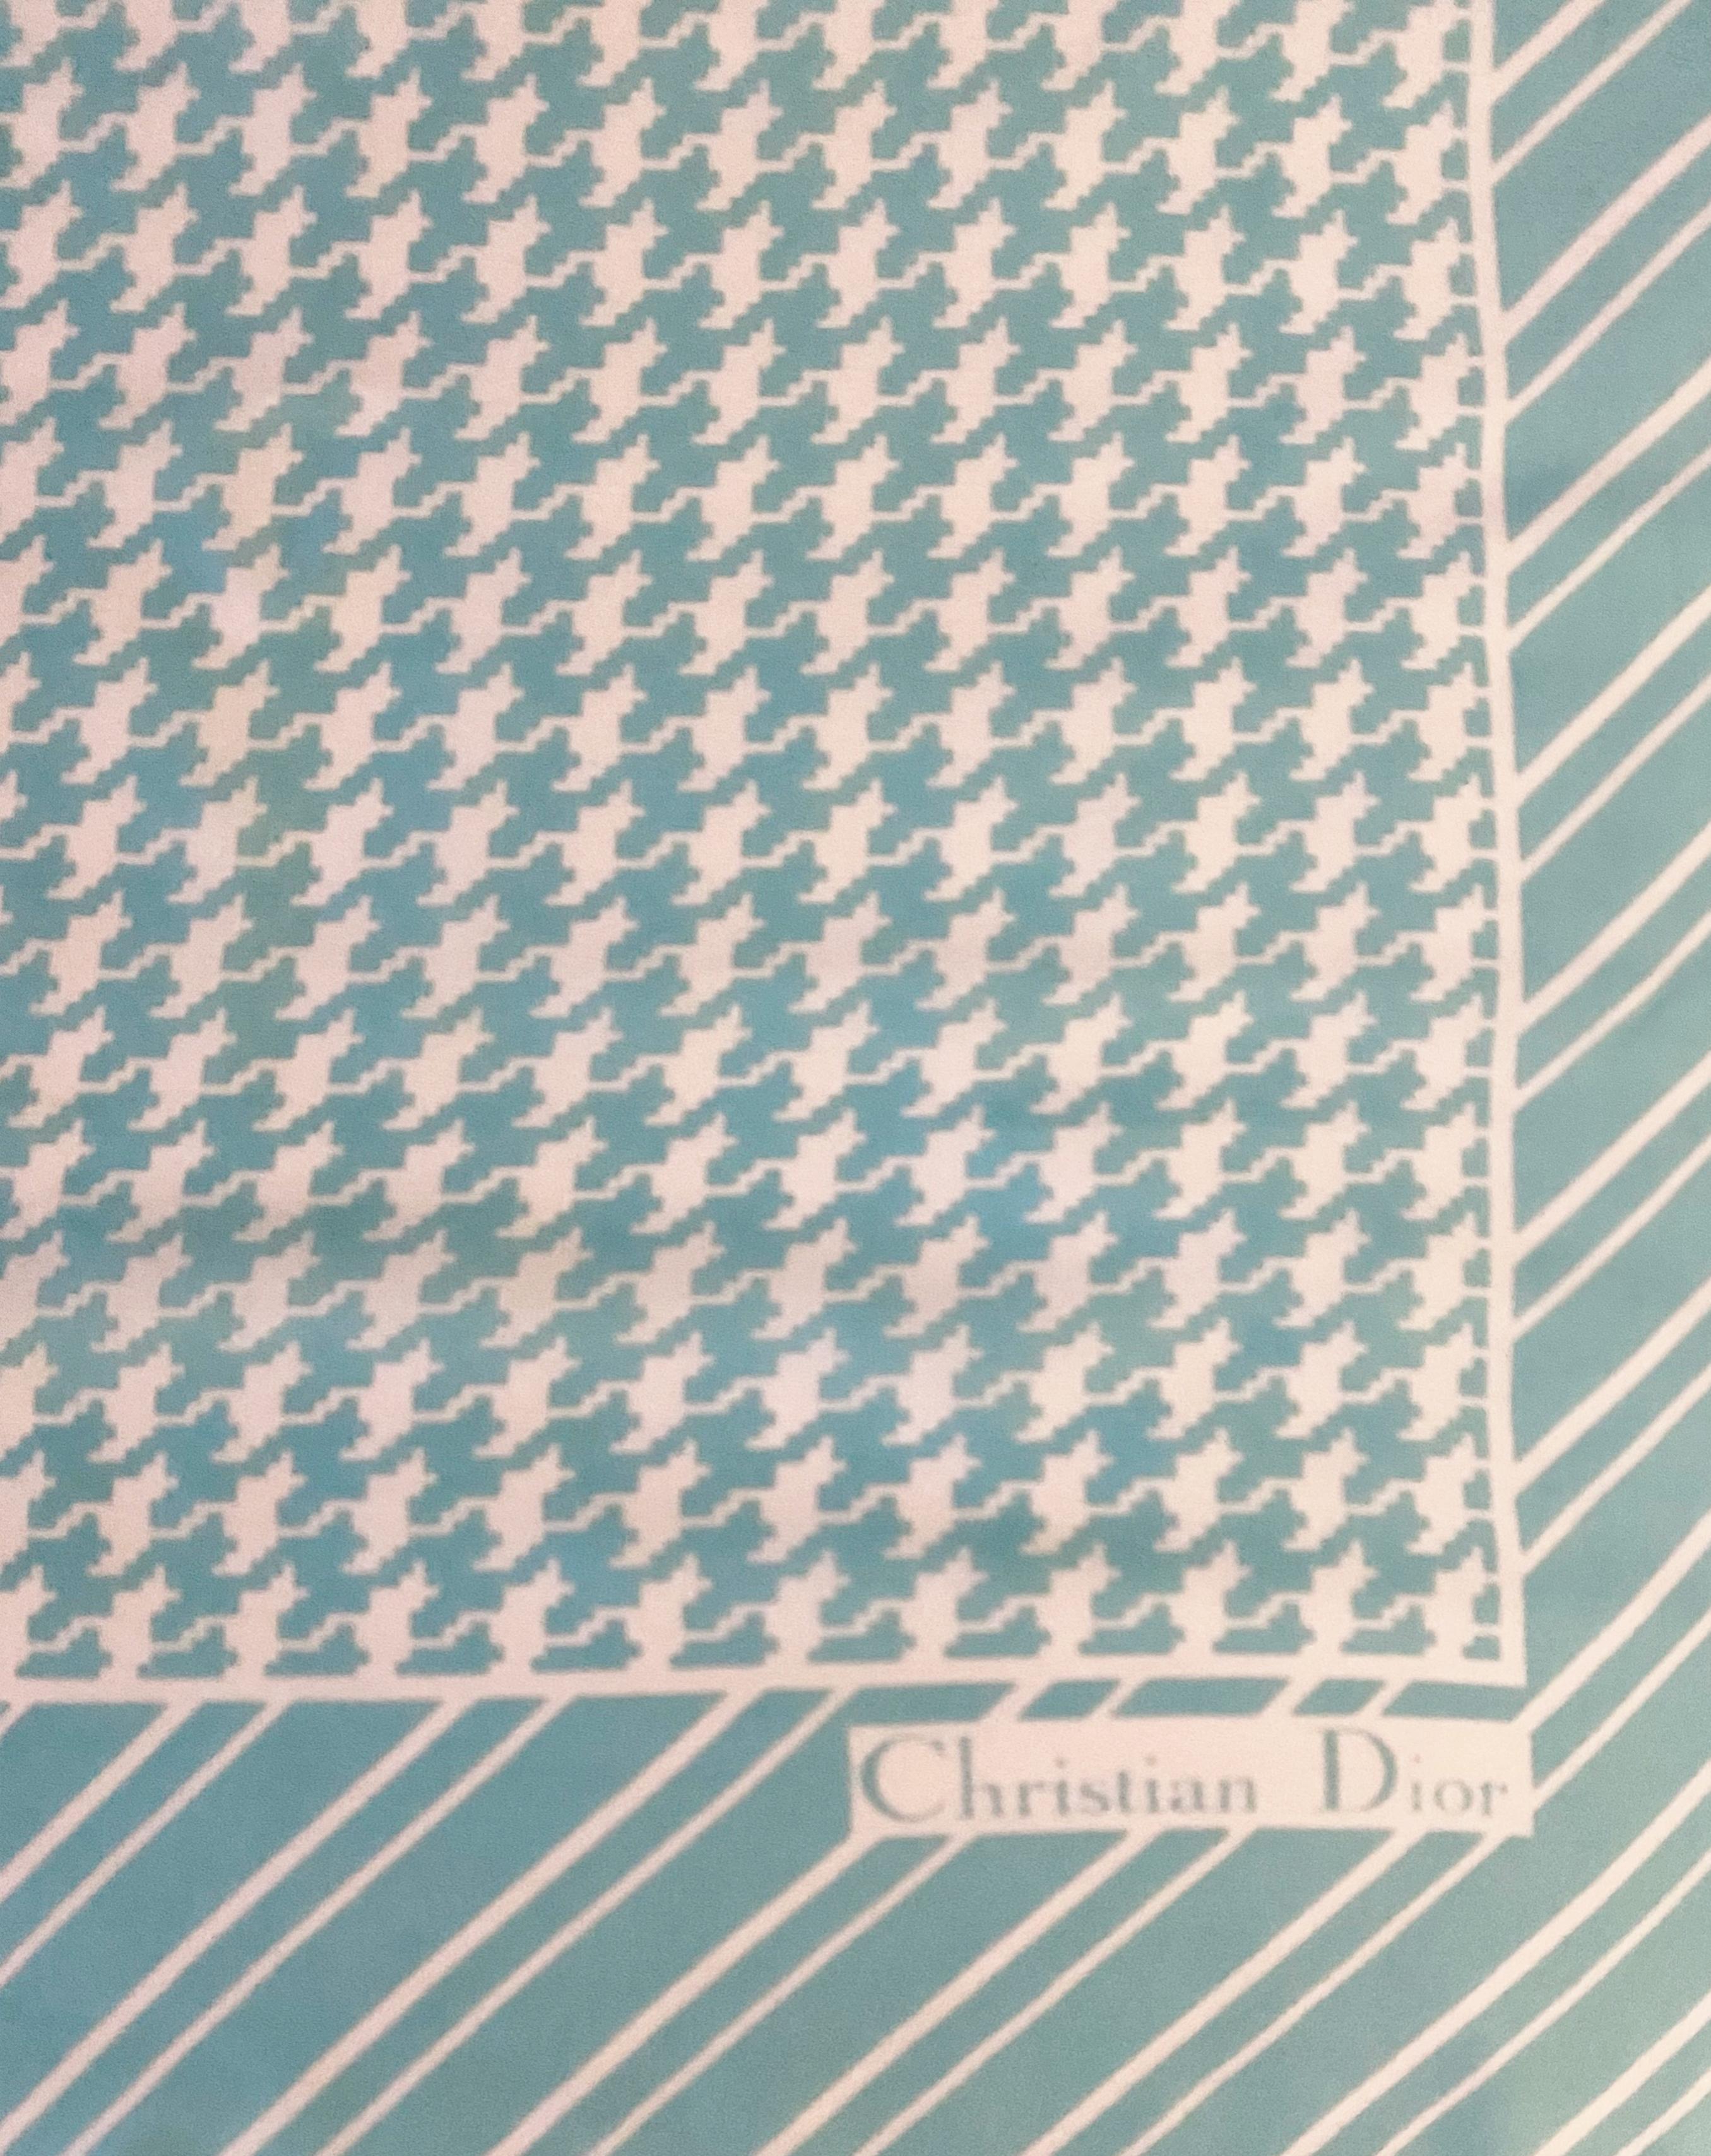 Women's or Men's 1980s Christian Dior Houndstooth Teal Turquoise Silk Scarf